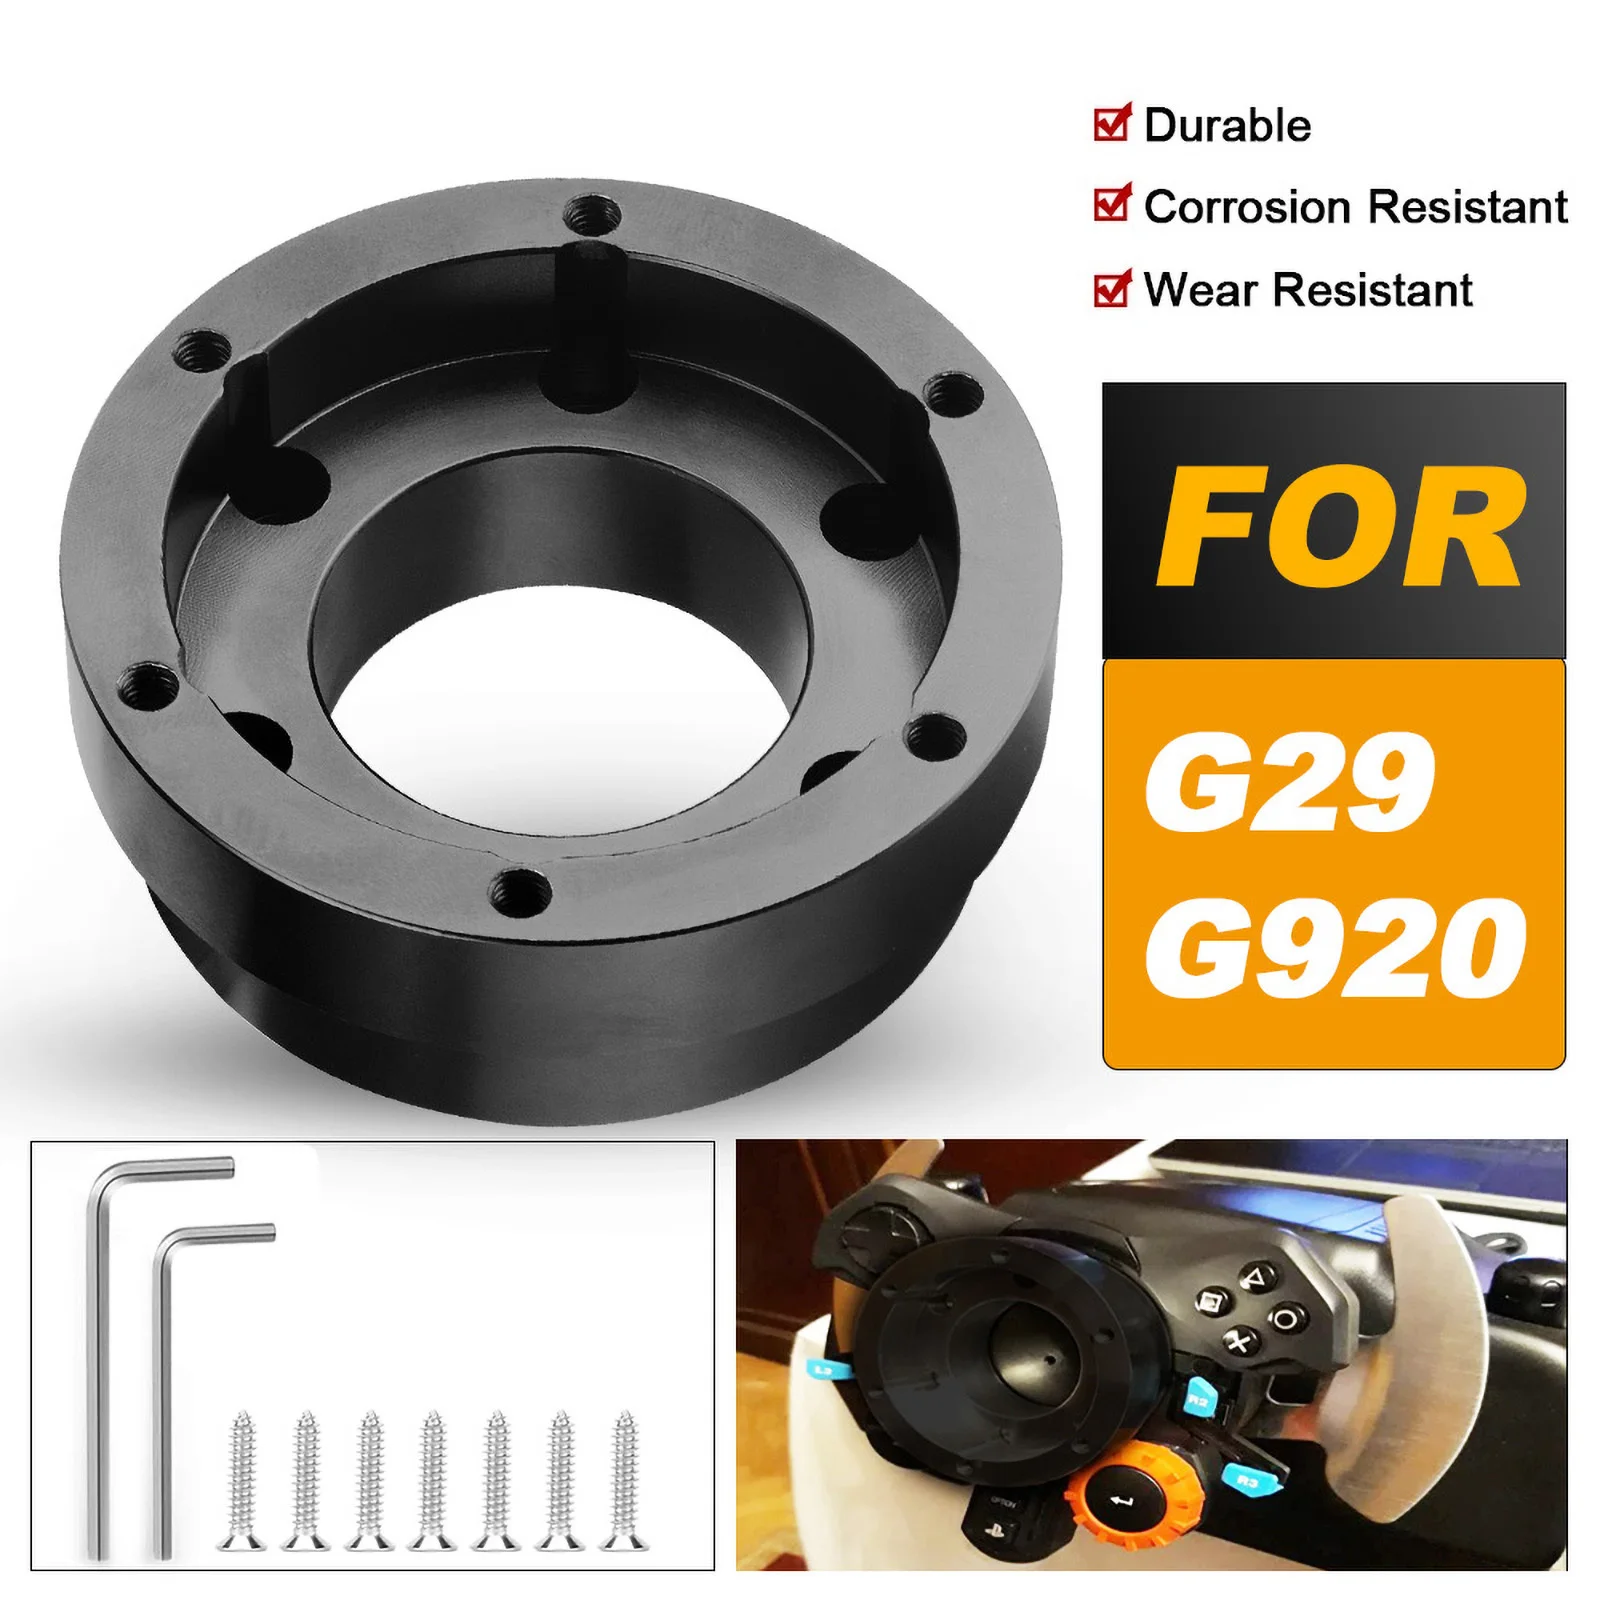 

For Logitech G29 G920 G923 70mm Adapter Plate Hub Boss For 13Inch Steering Wheel PCD Racing Car Game Aluminum Modification